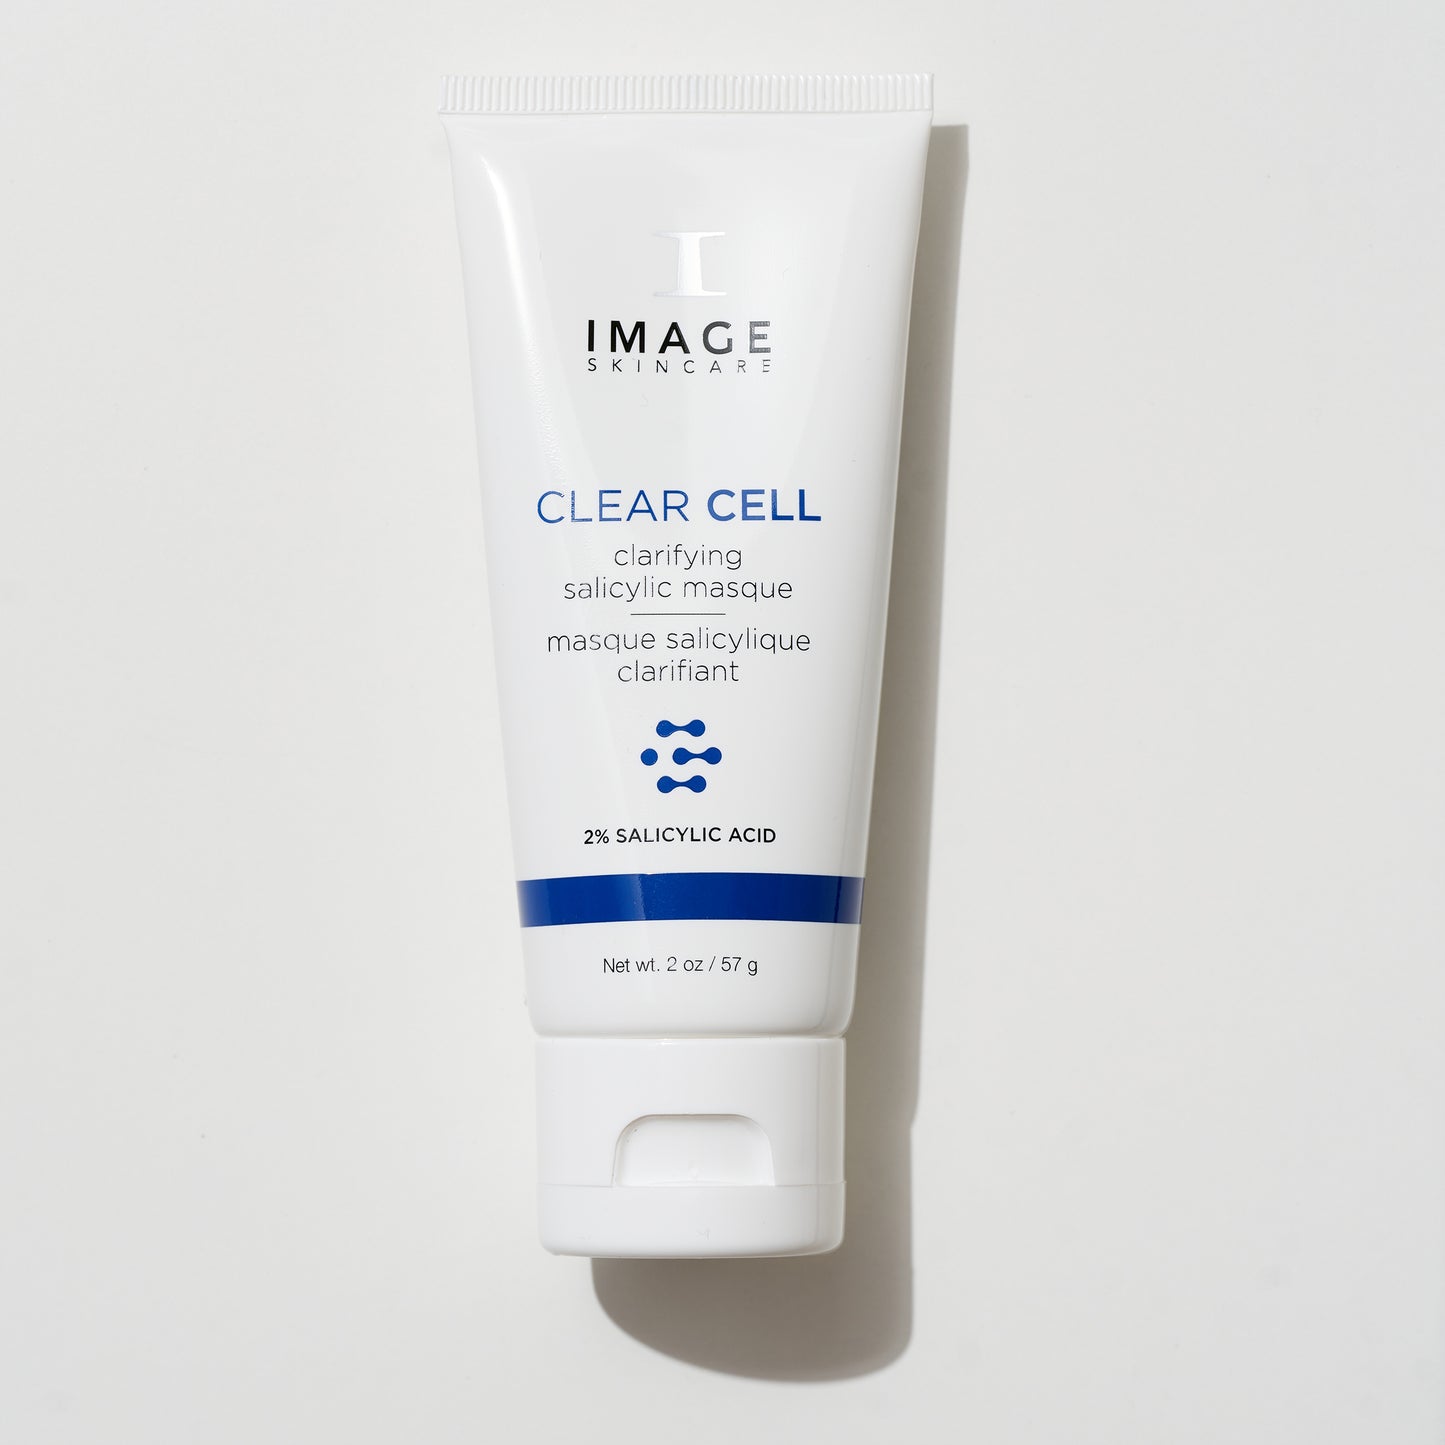 CLEAR CELL Clarifying Masque, Image Skincare